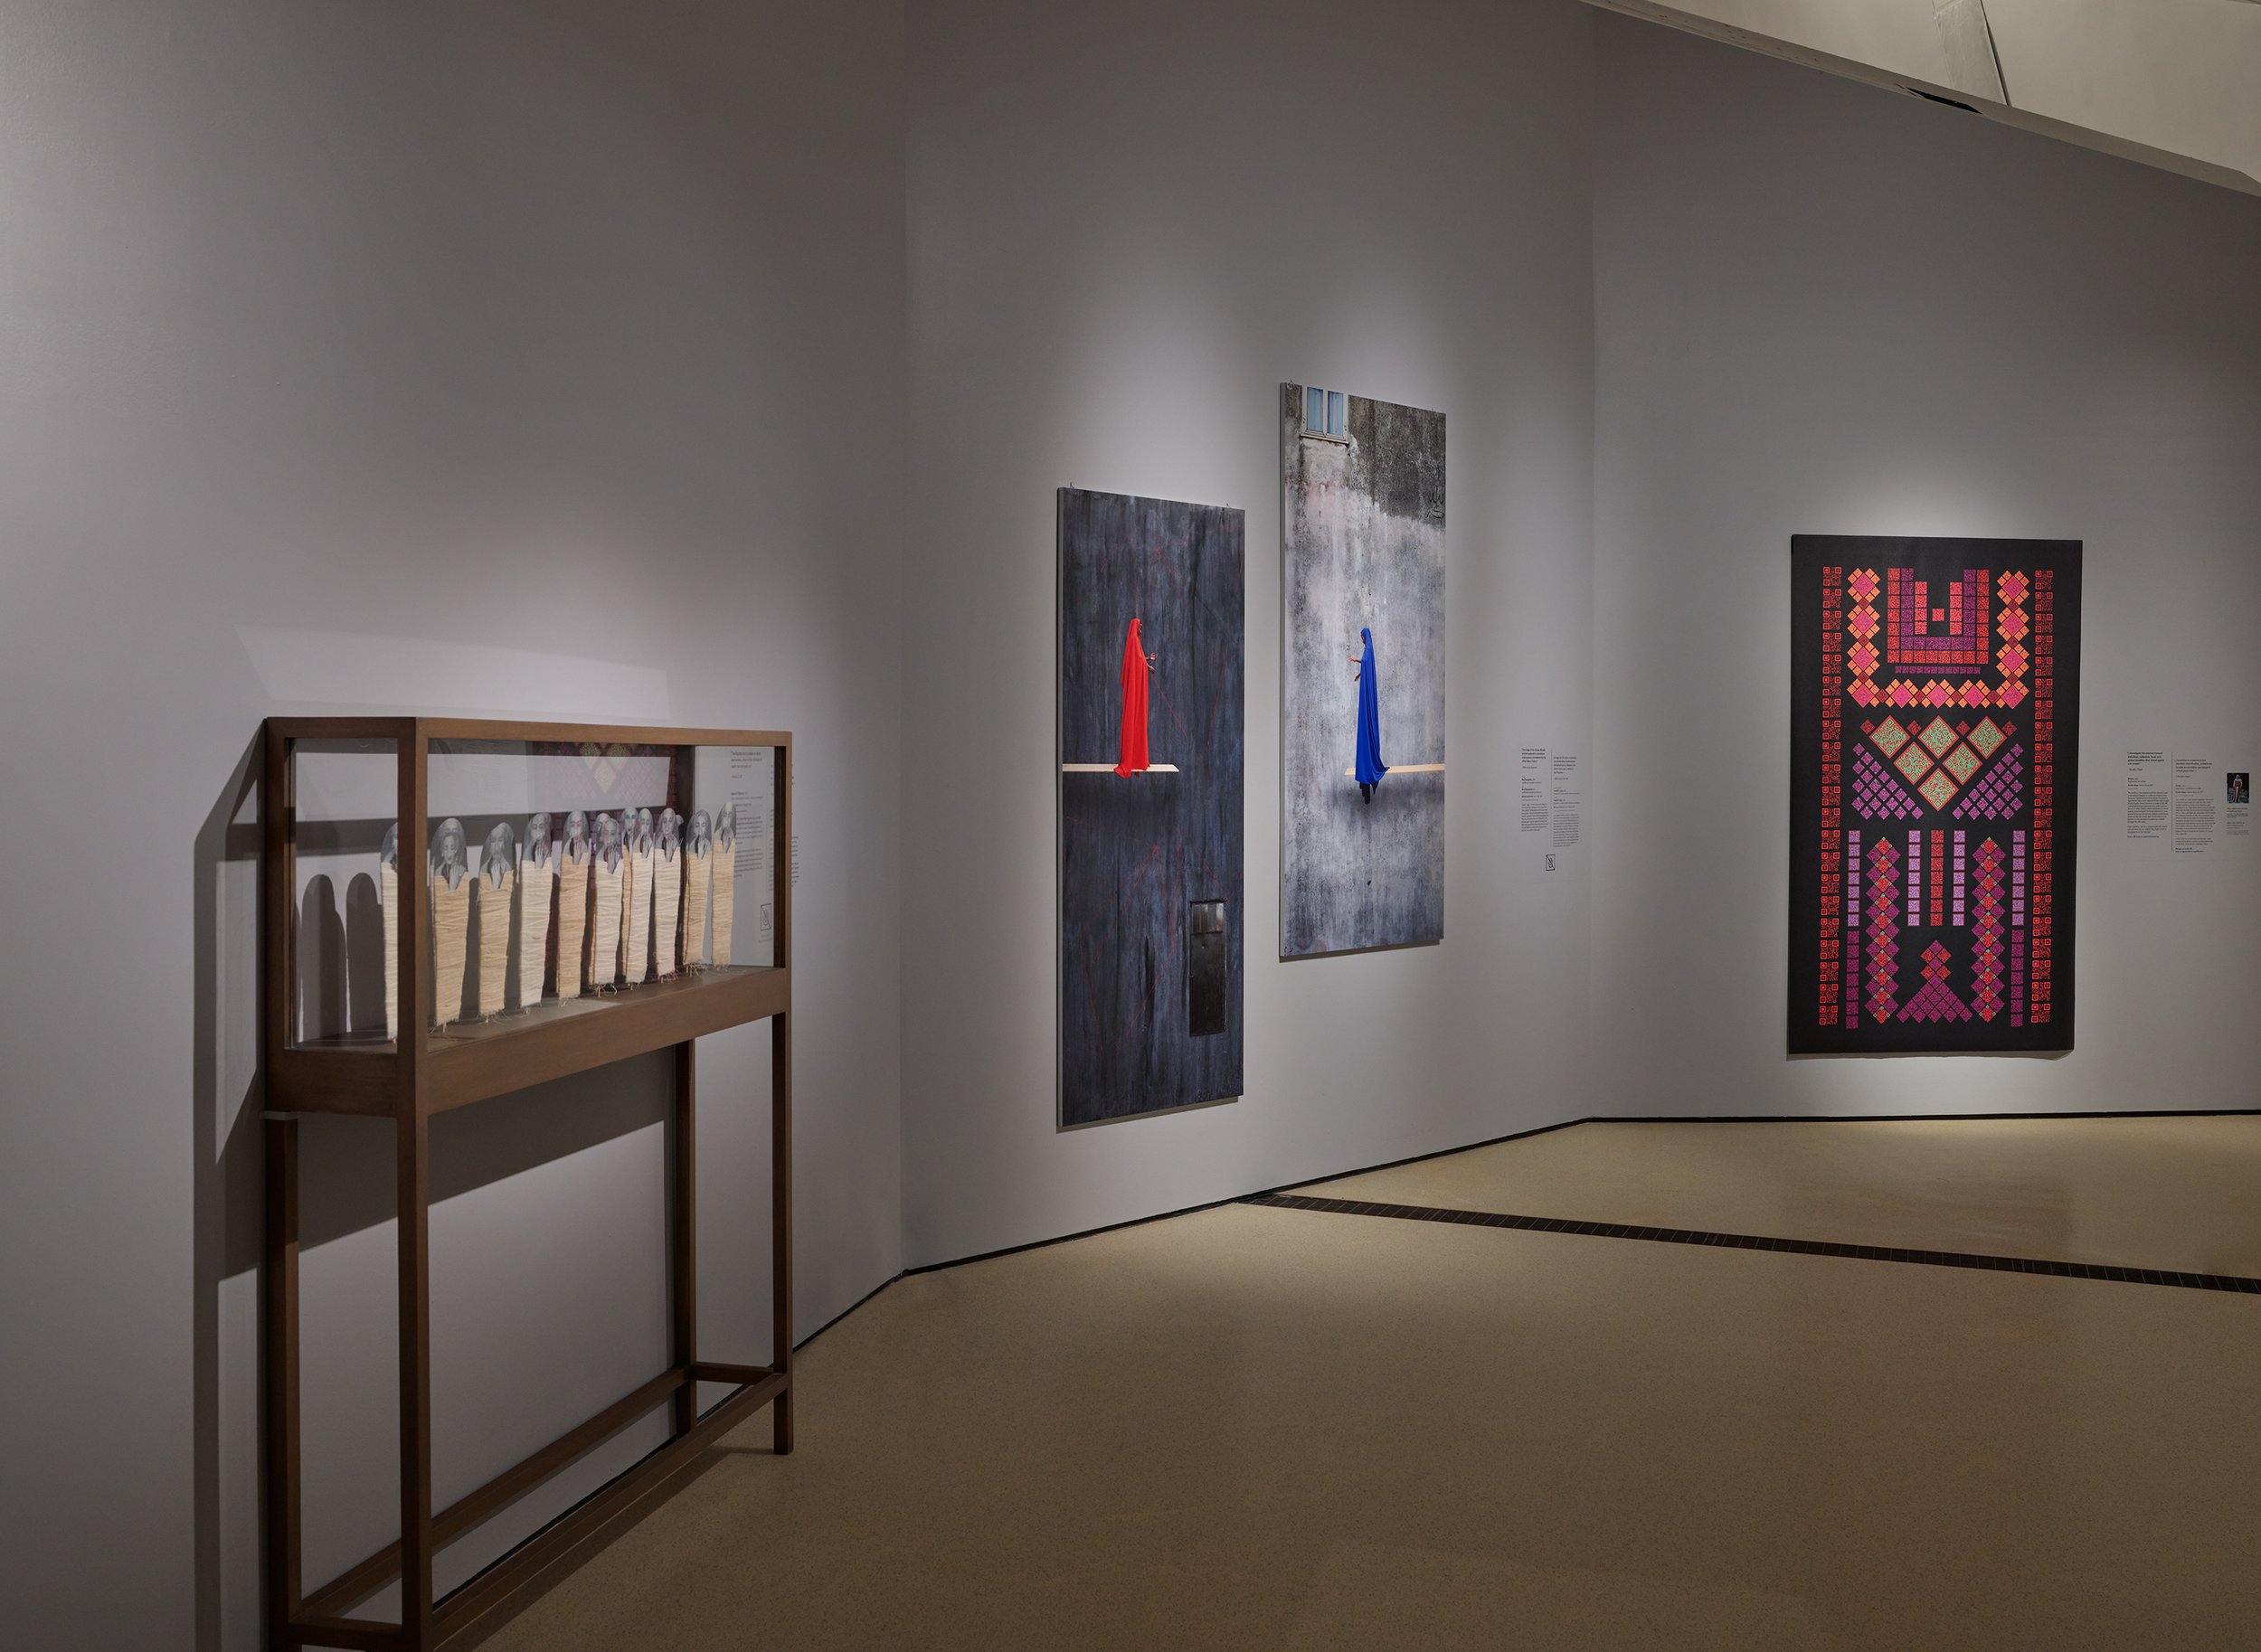  Installation view - Being and Belonging: Contemporary Women Artists from the Islamic World and Beyond on display at the Royal Ontario Museum, 2023.   Photo: Paul Eekhoff Courtesy of ROM (Royal Ontario Museum), Toronto, Canada. ©ROM 